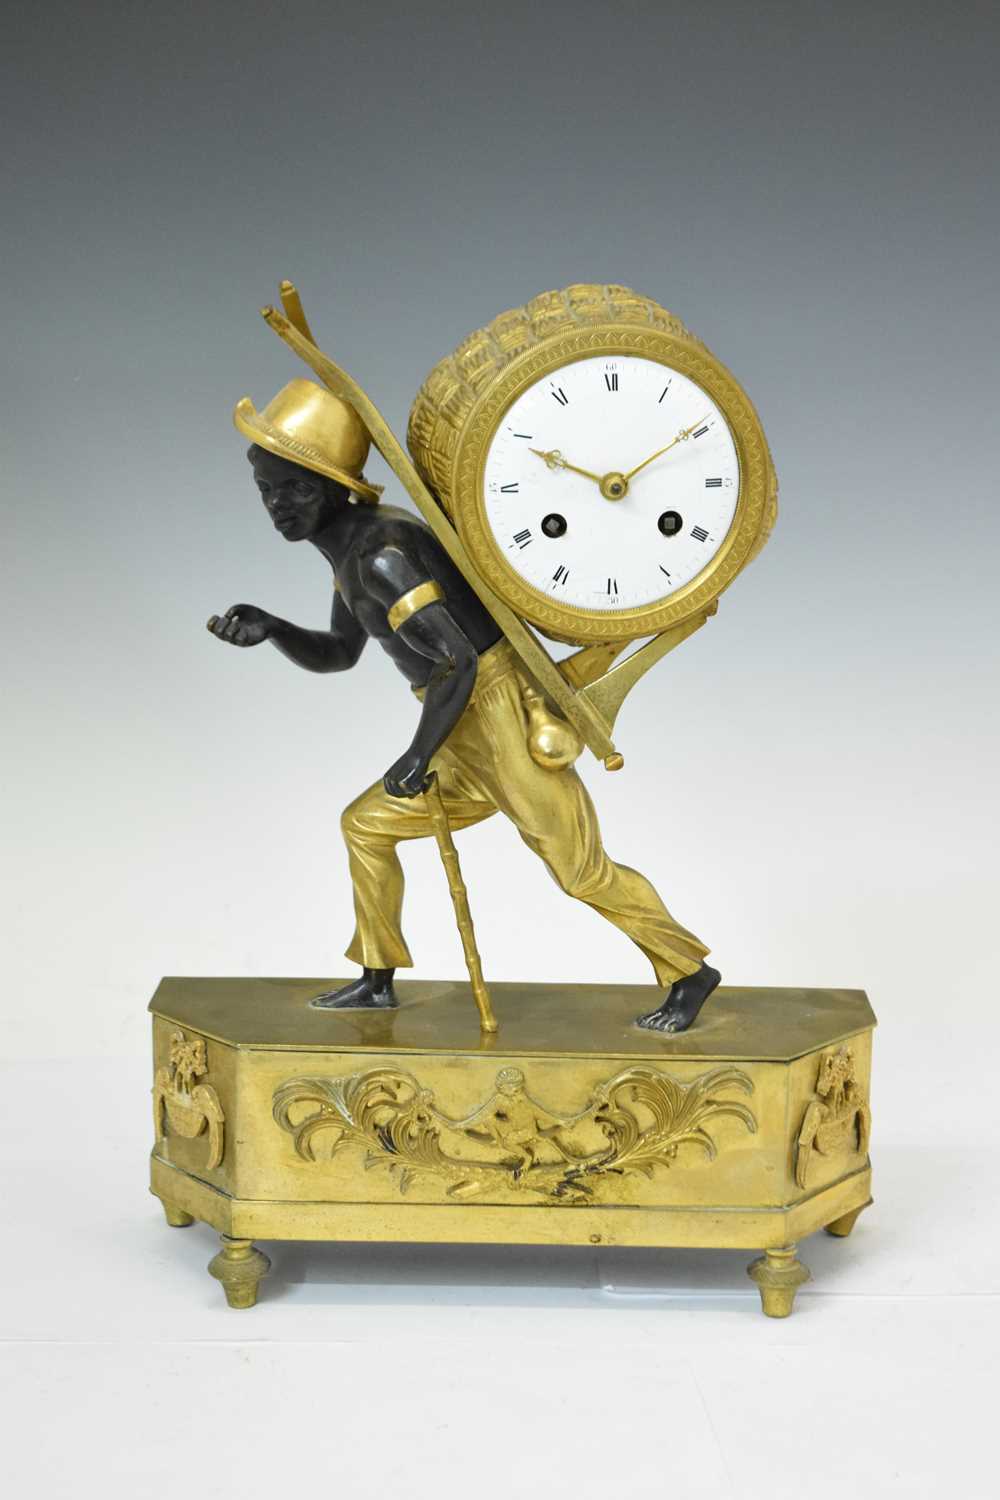 Early 19th century French Empire patinated bronze and ormolu figural mantel clock - Image 17 of 17